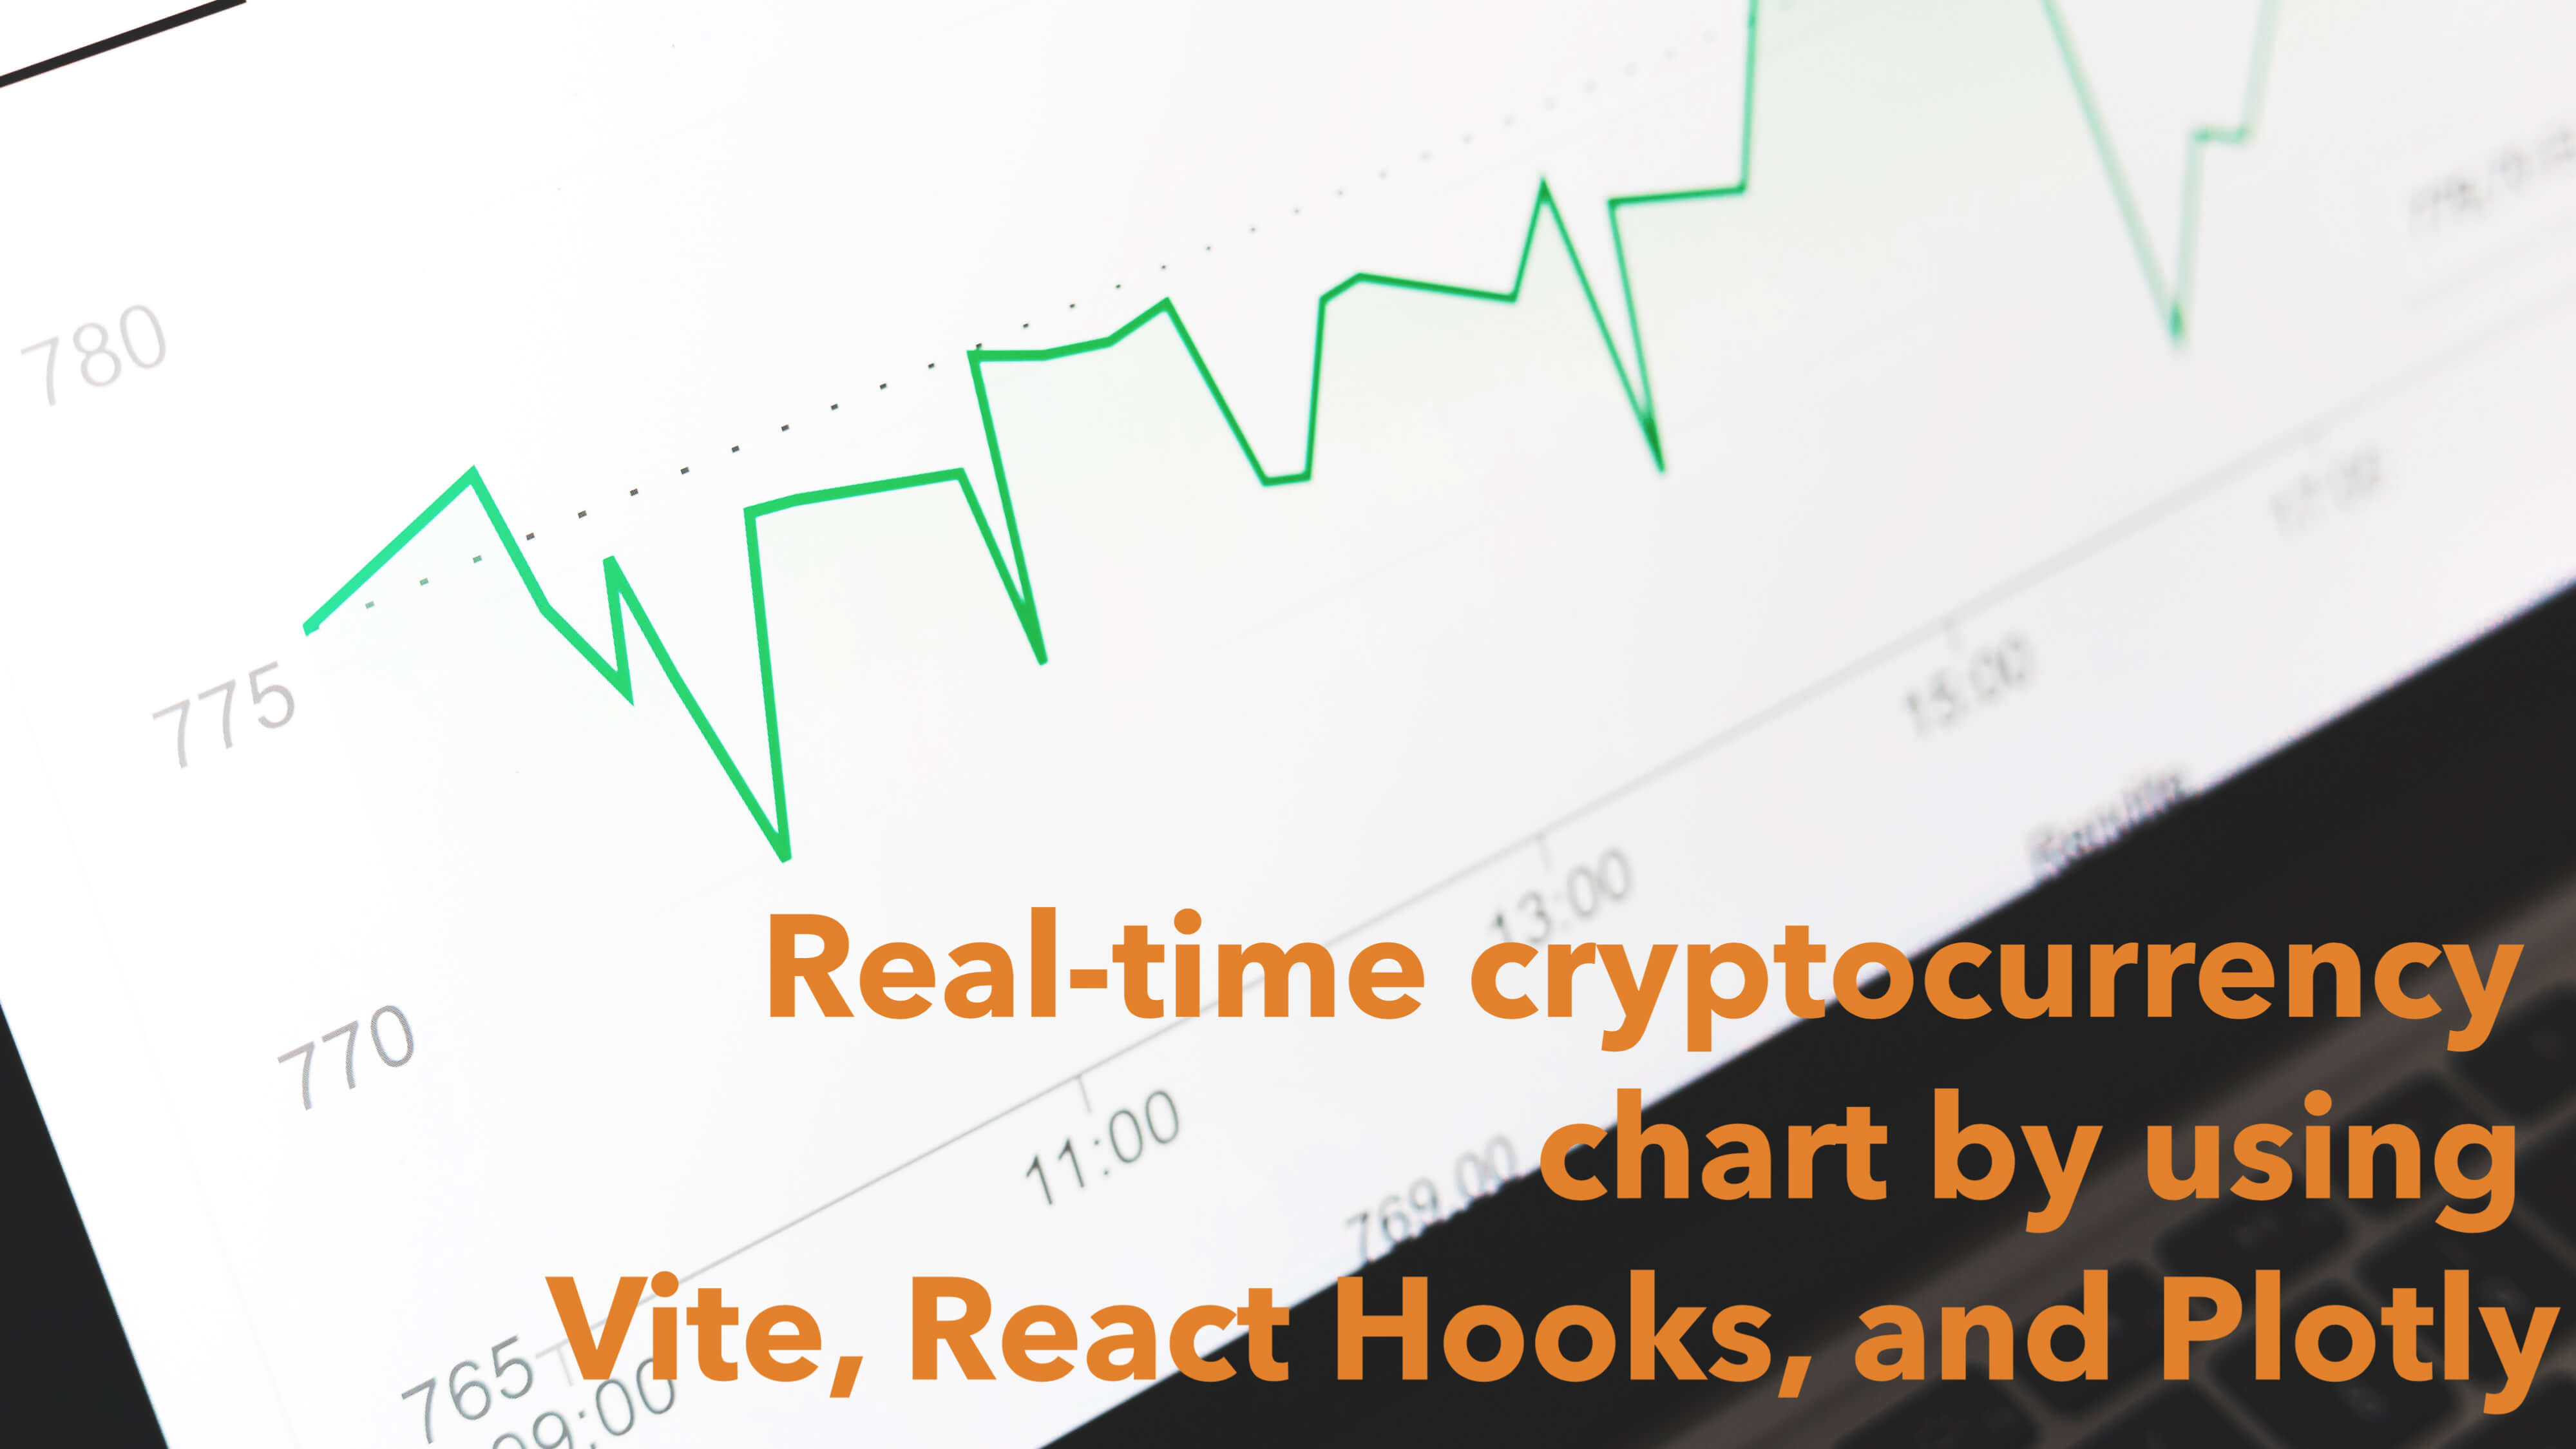 Develop a basic cryptocurrency chart app with (near) real-time updating, by using Vite, React Hooks, and Plotly